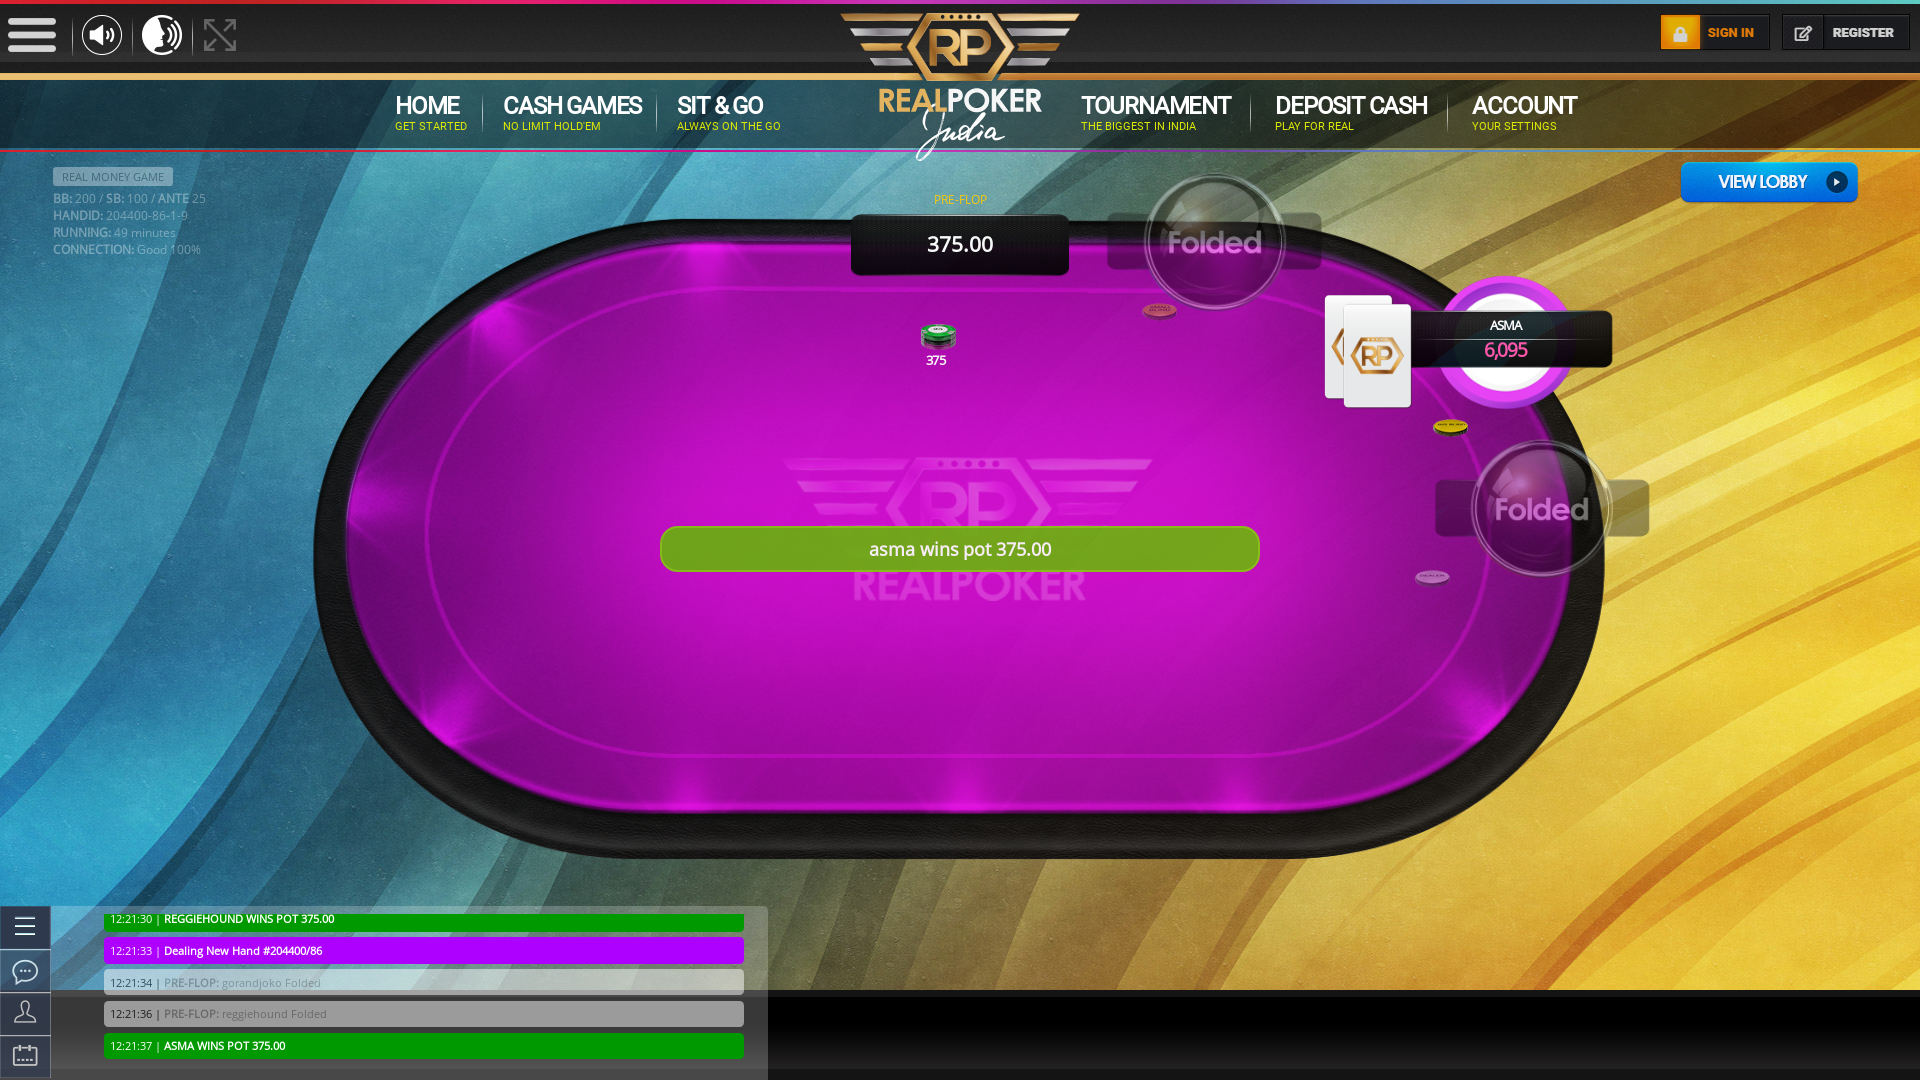 Indian online poker on a 10 player table in the 49th minute match up